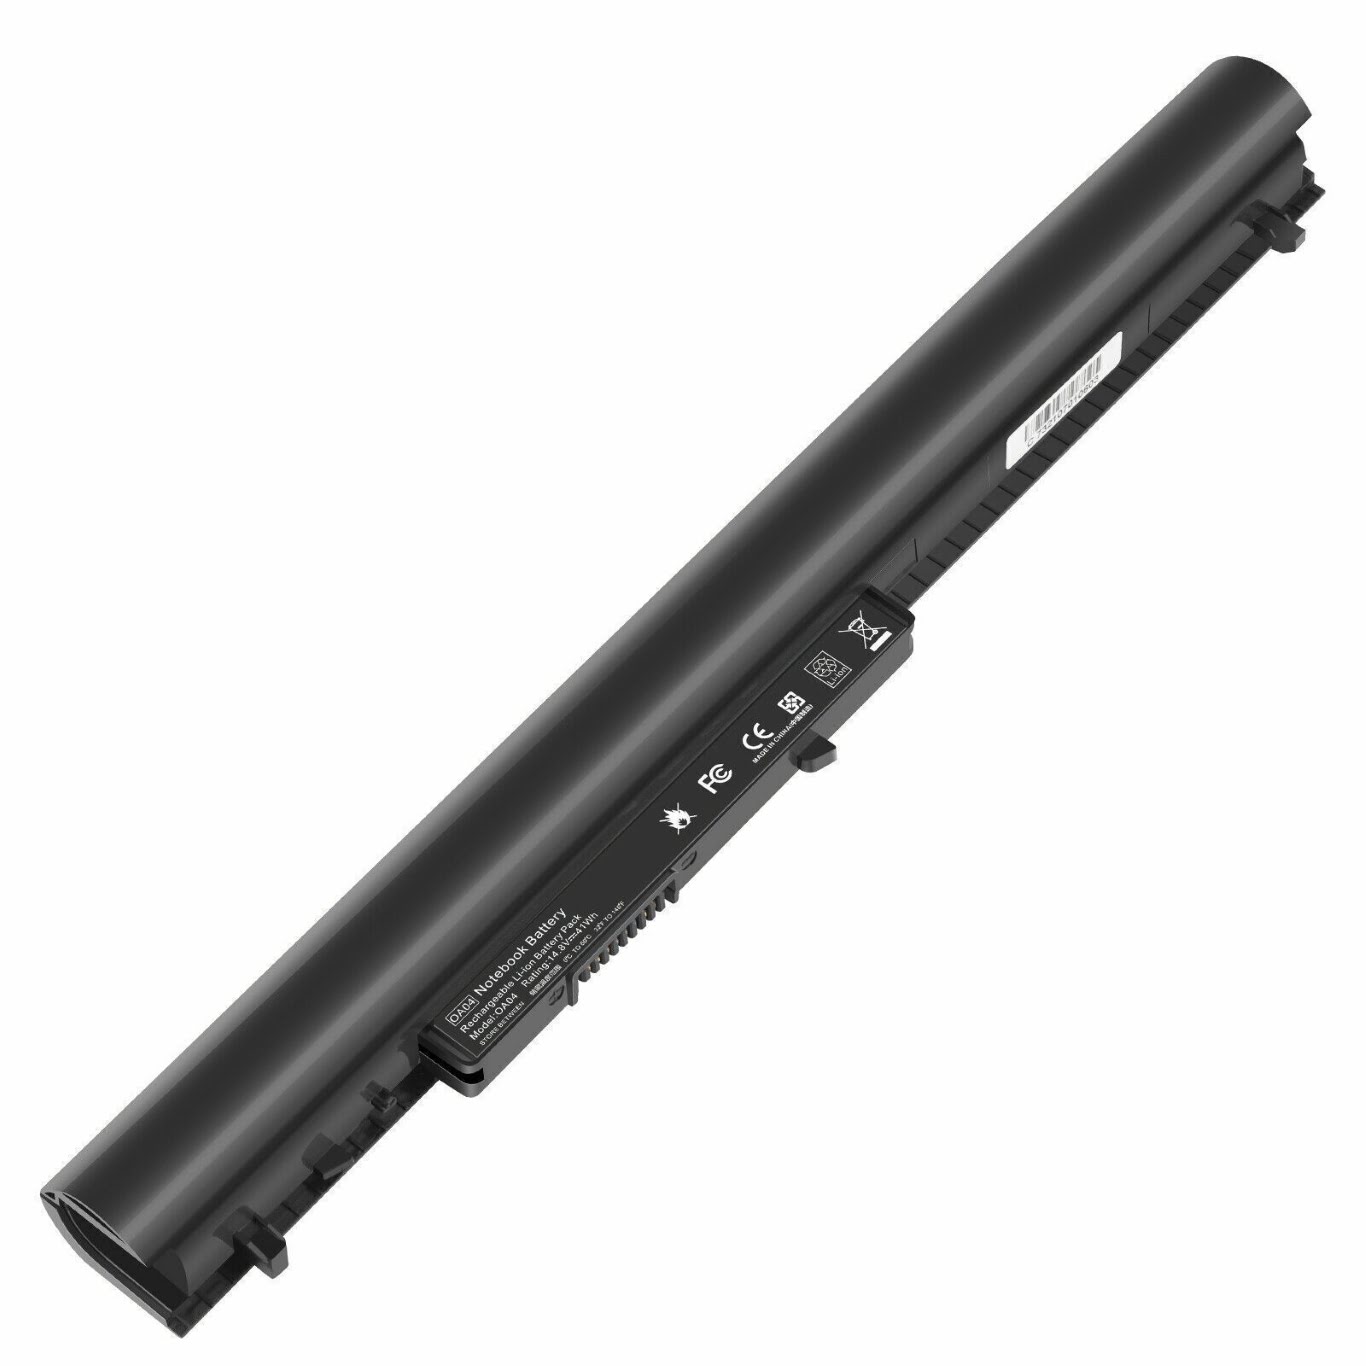 0A03, 0A04 replacement Laptop Battery for HP 14-A001TU, 14-A001TX, 4 cells, 14.8V, 41wh